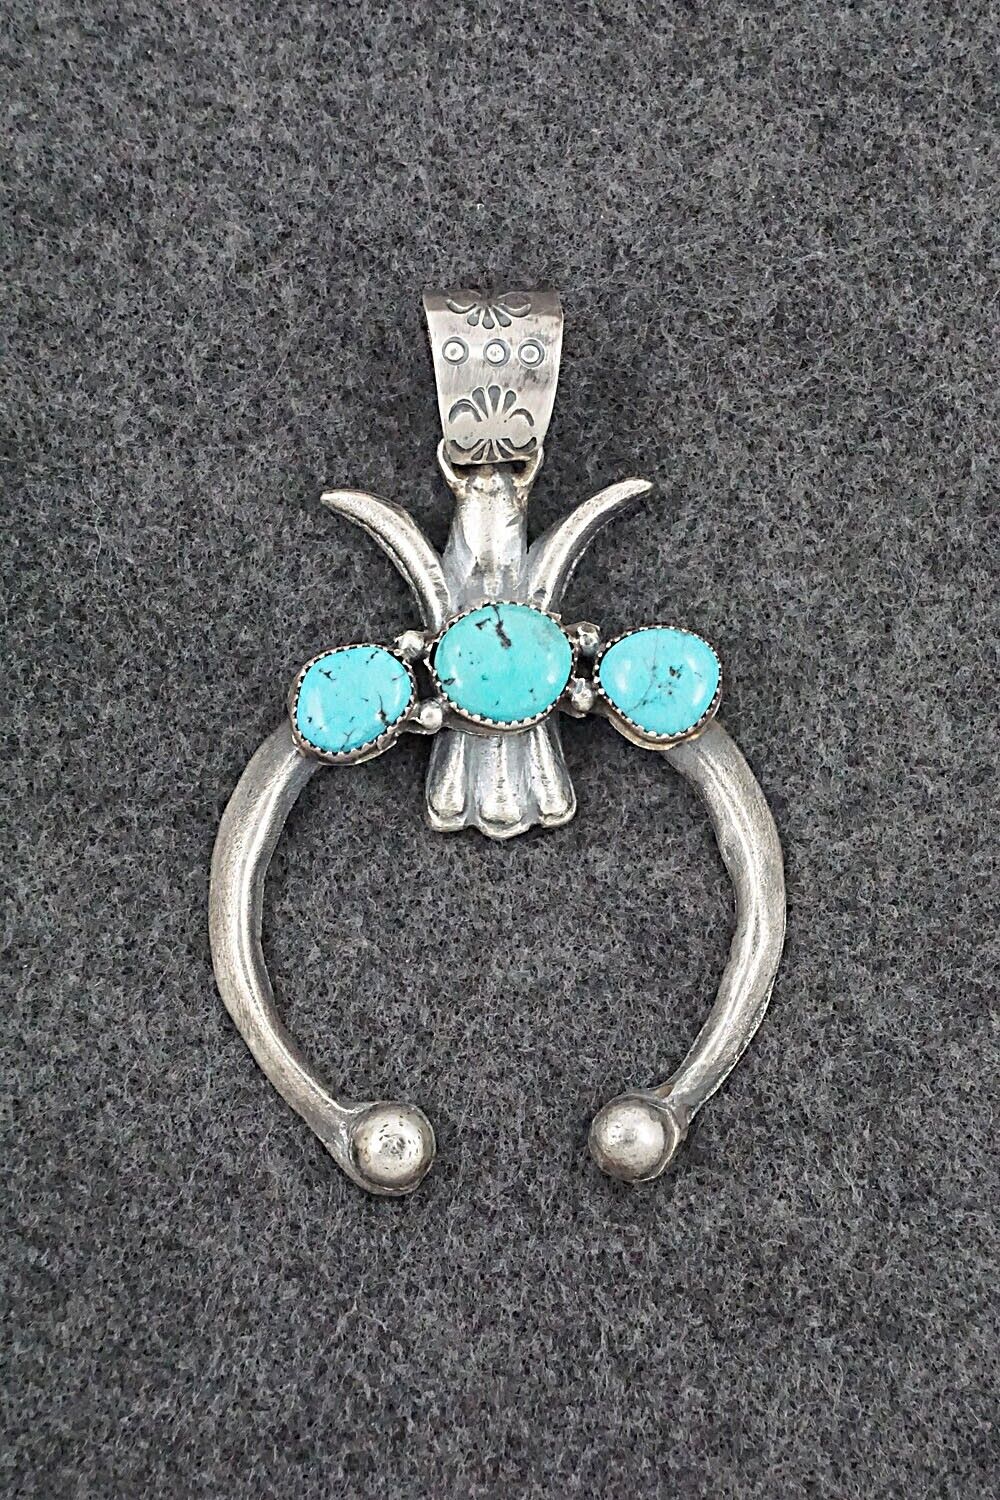 Turquoise and Sterling Silver Pendant - Gilbert Martin